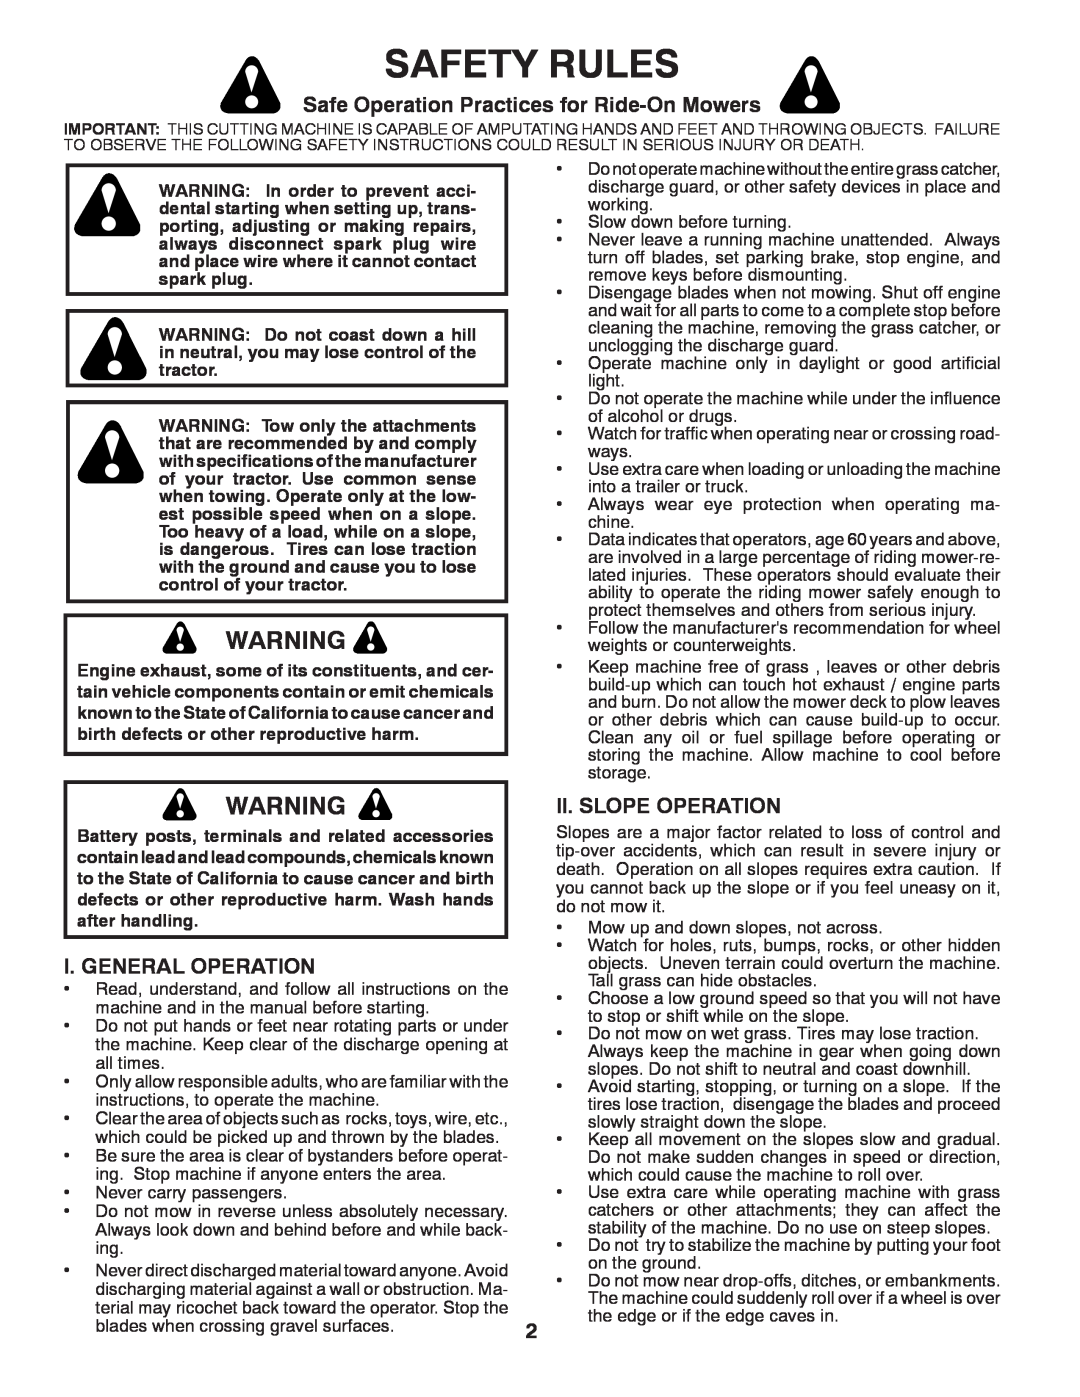 Poulan 425179 manual Safety Rules, Safe Operation Practices for Ride-On Mowers, I. General Operation, Ii. Slope Operation 